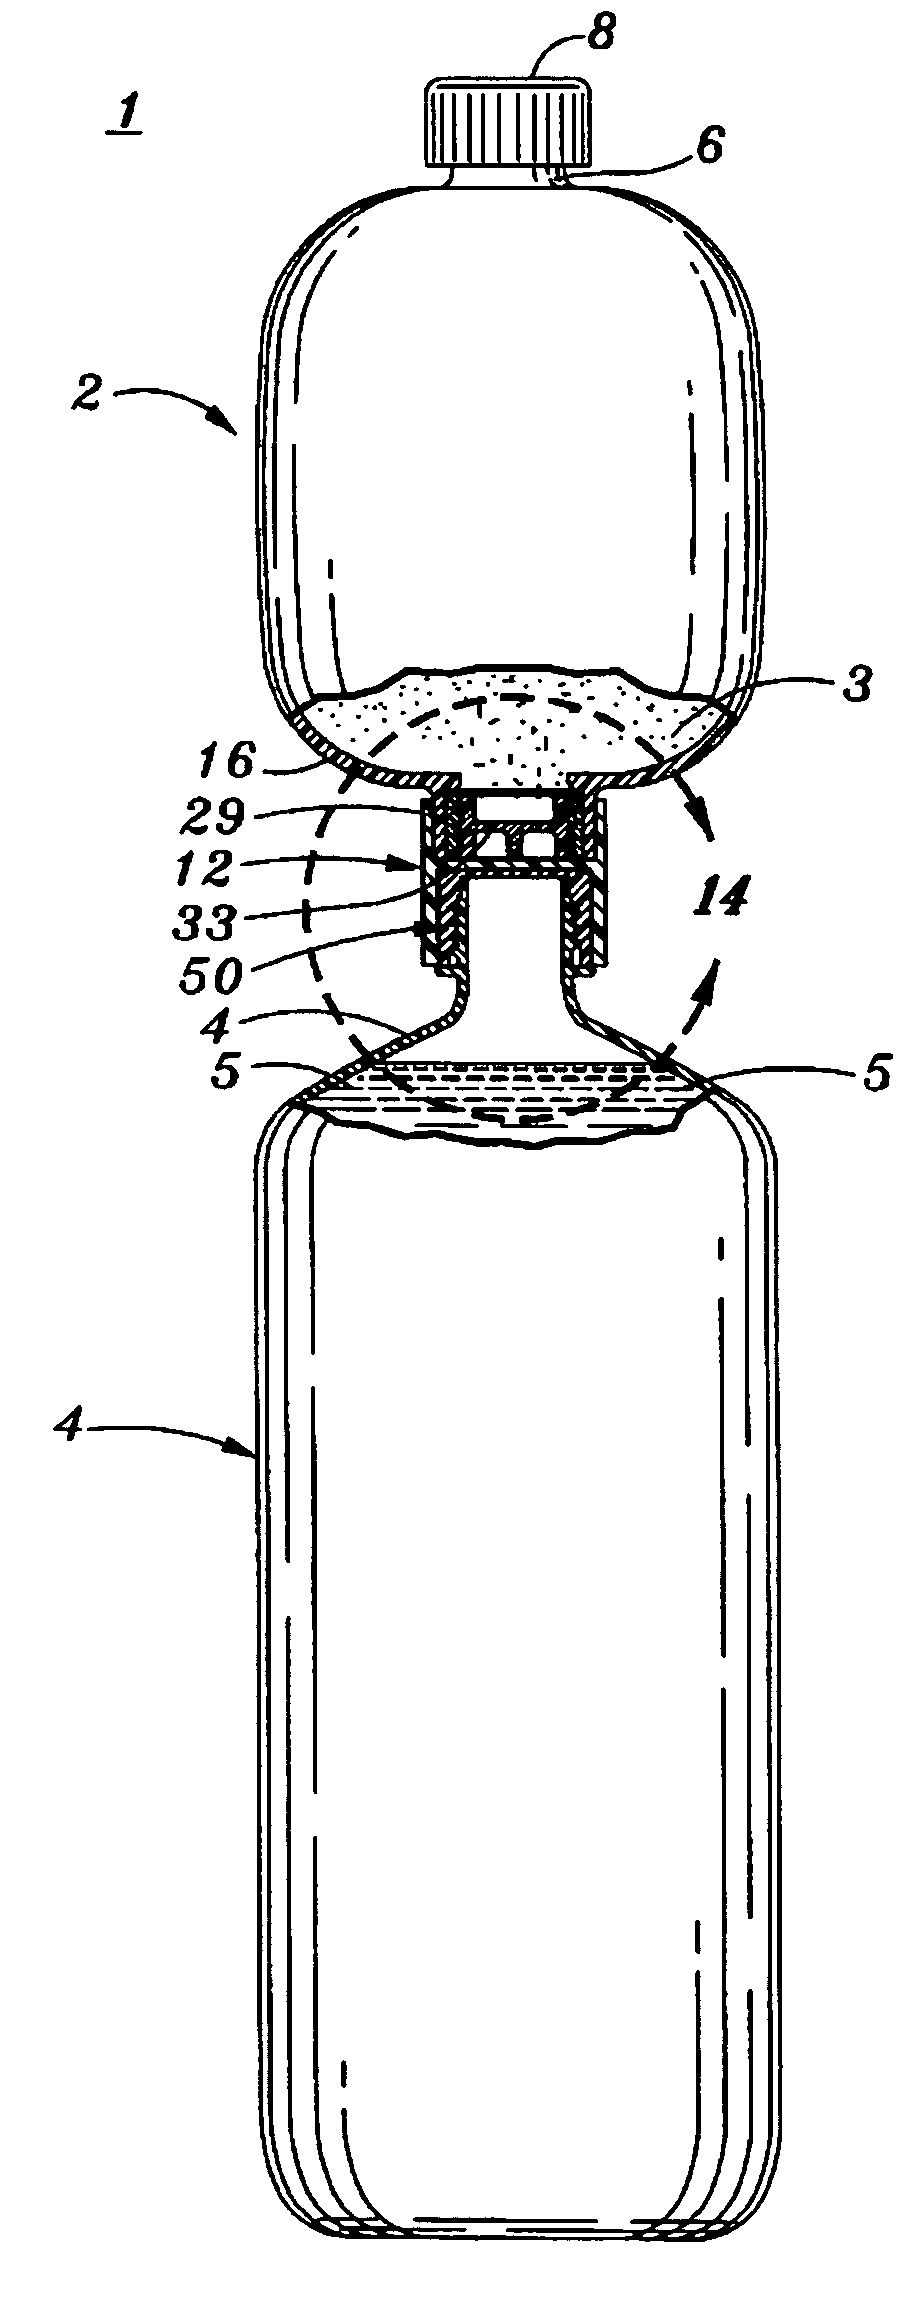 Packaging system for storing and mixing separate ingredient components